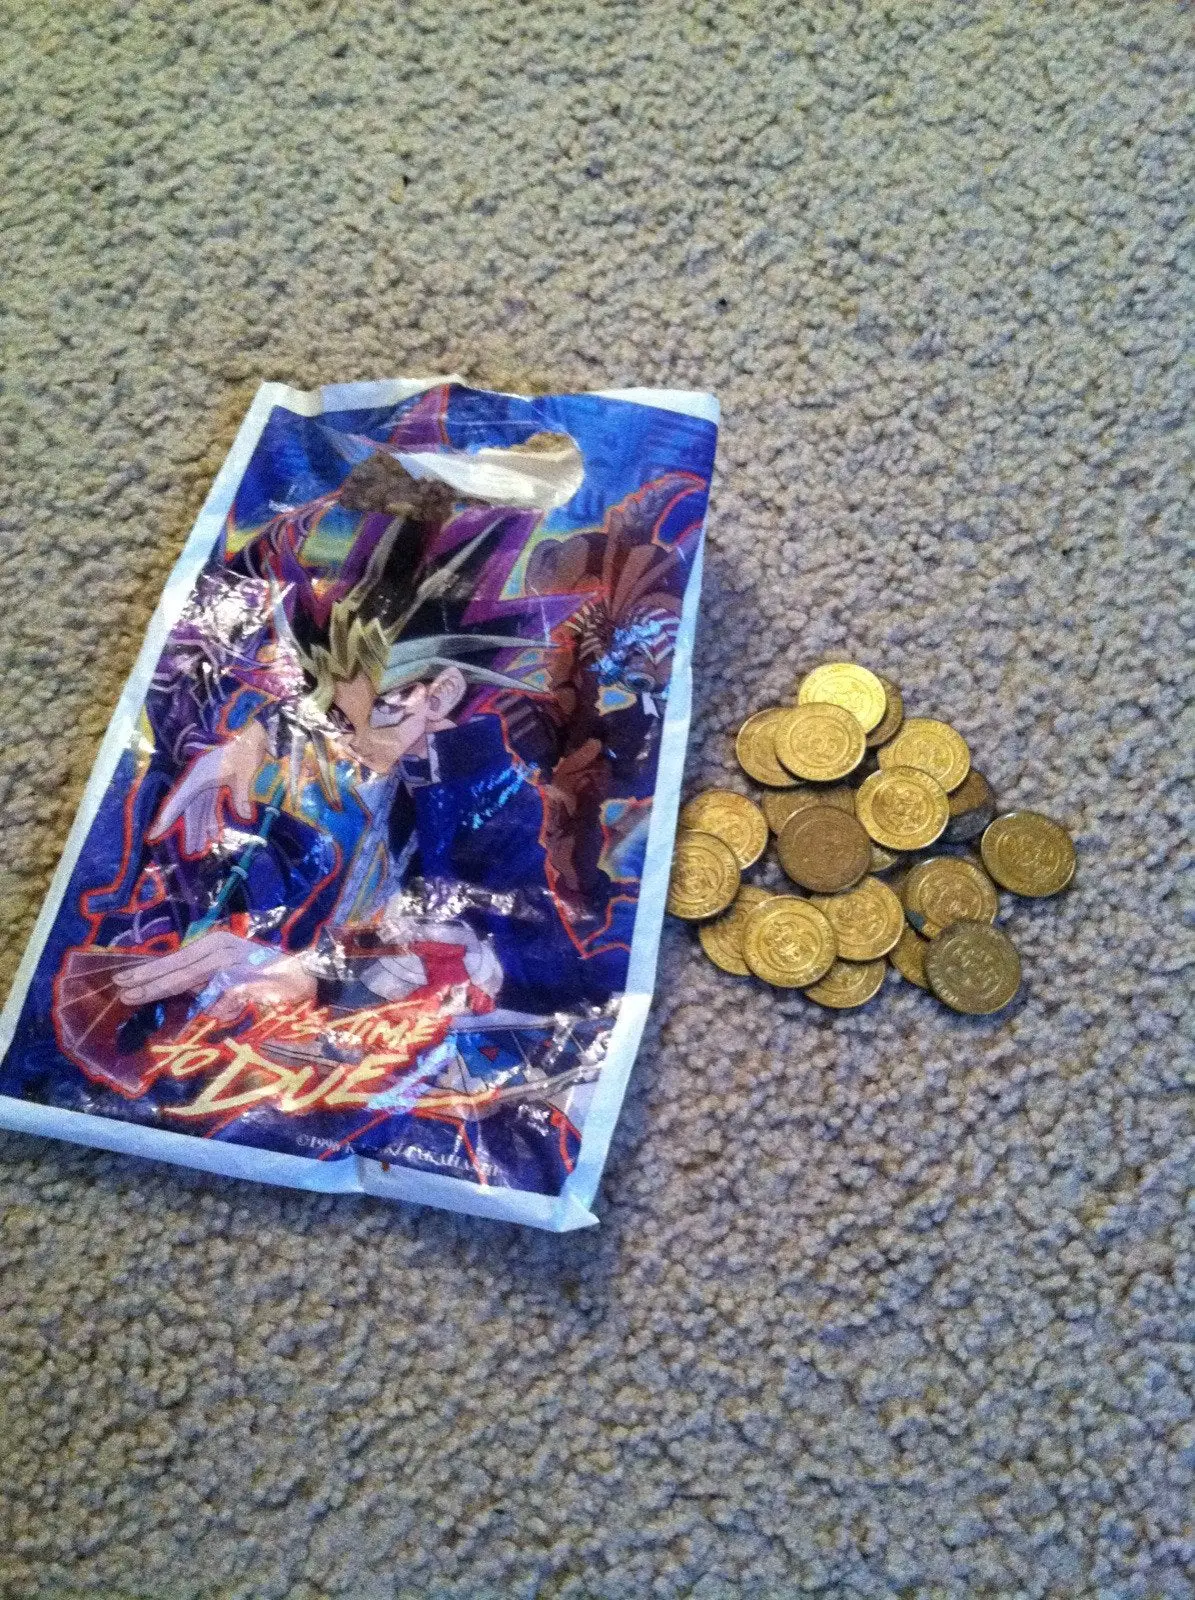 I found a back of old Chuck E. Cheese tokens from the ...